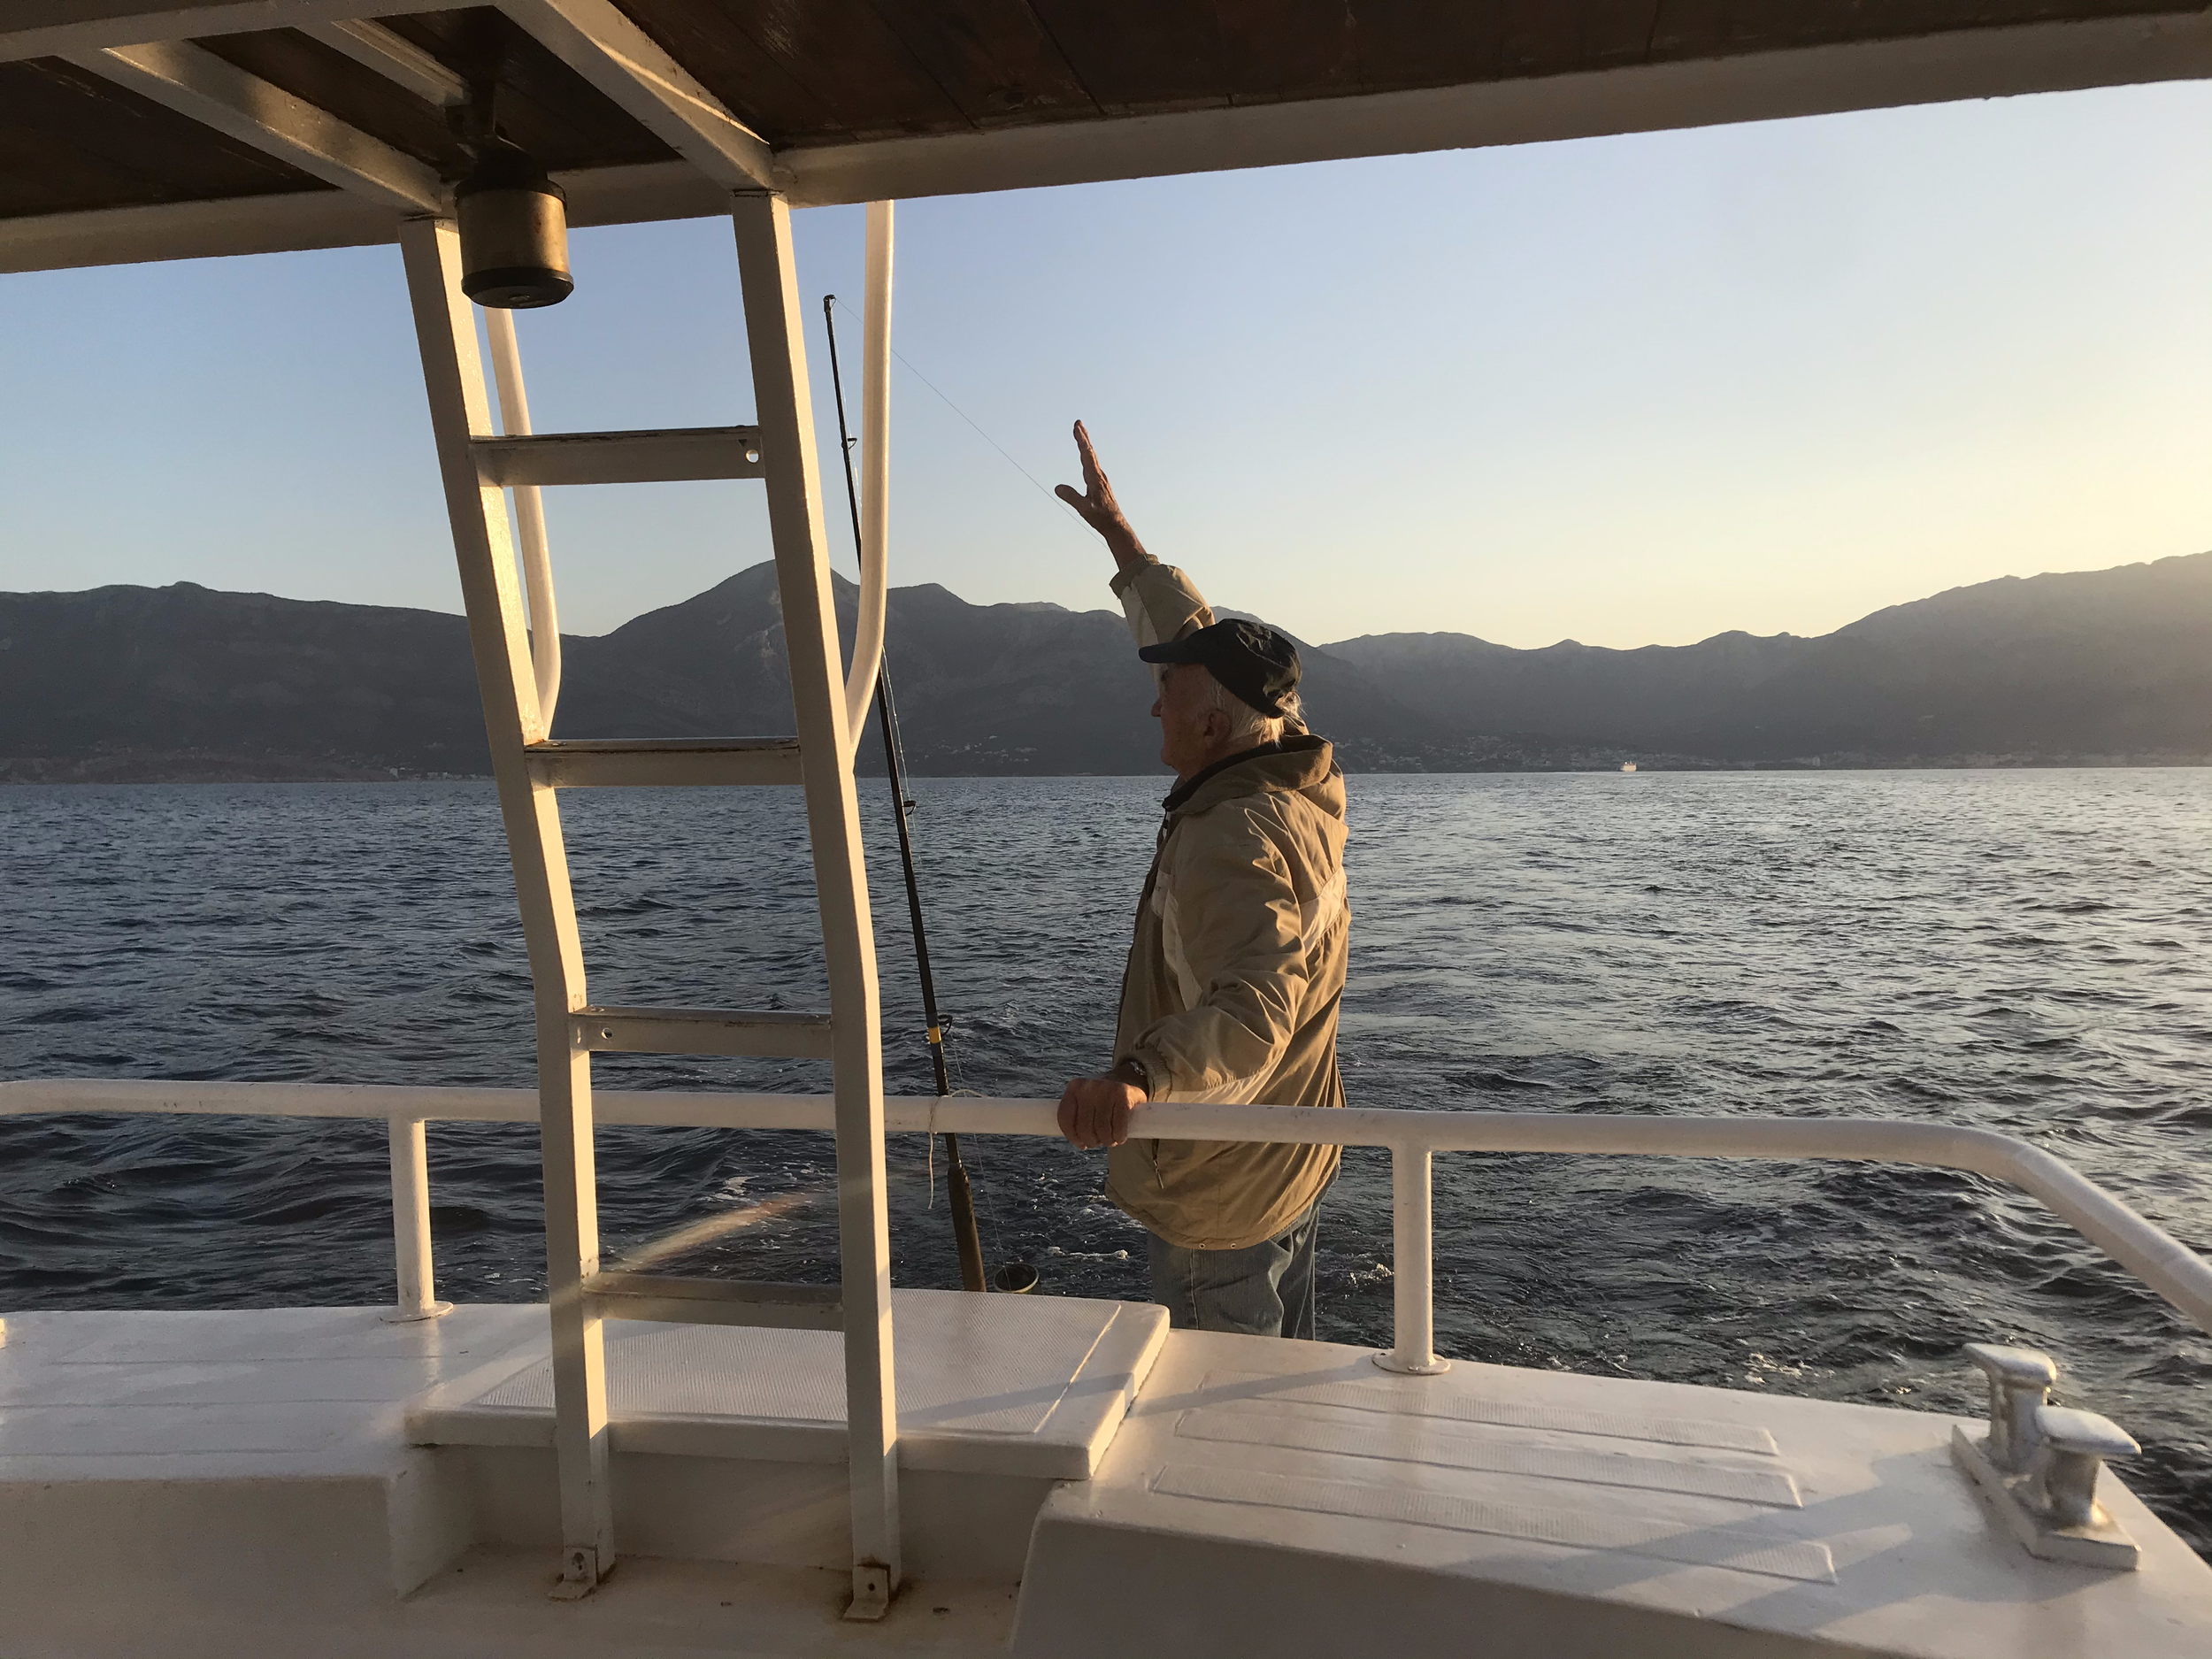 Fishing from our research boat in Bar, Montenegro. Photo by Elle Sibthorpe.